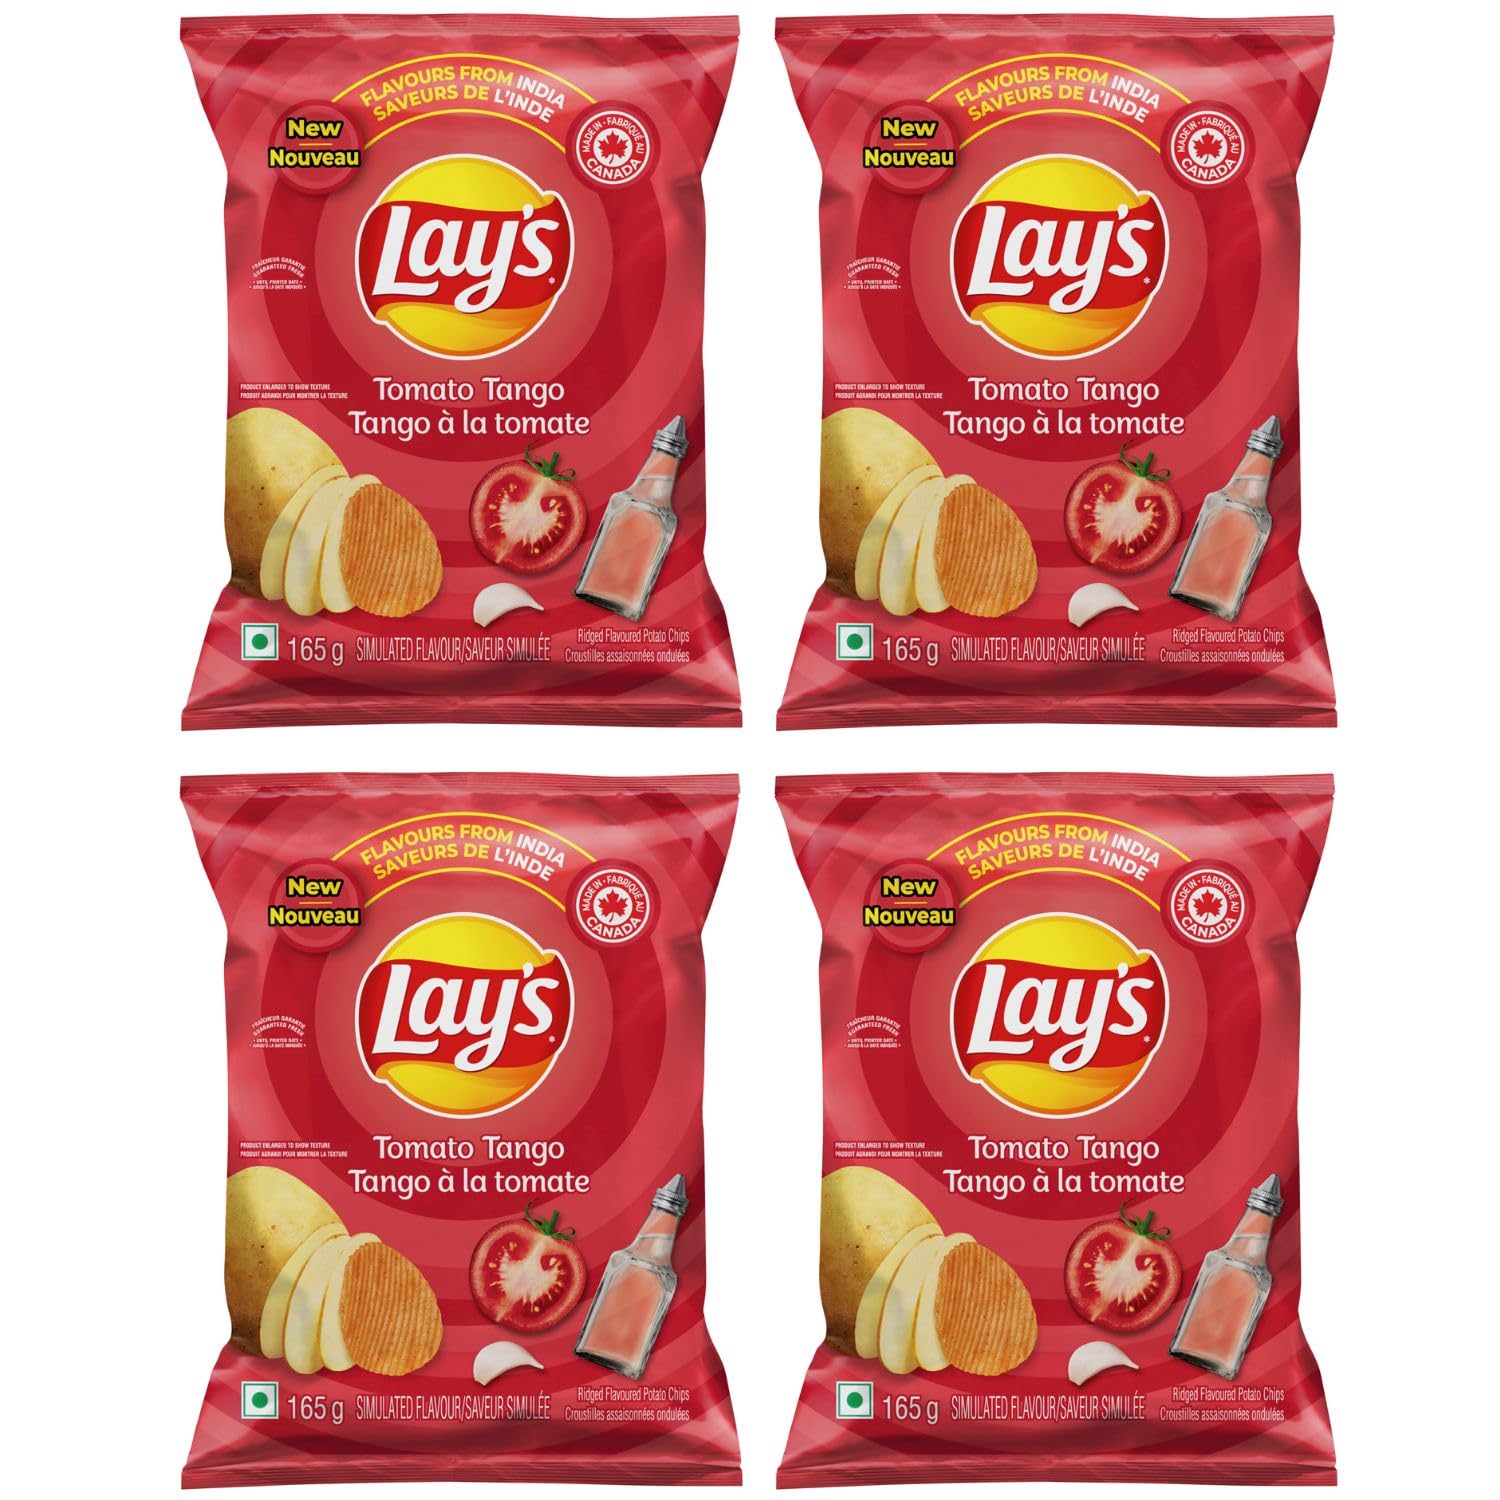 Lays Flavours from India Tomato Tango Ridged Potato Chips pack of 4